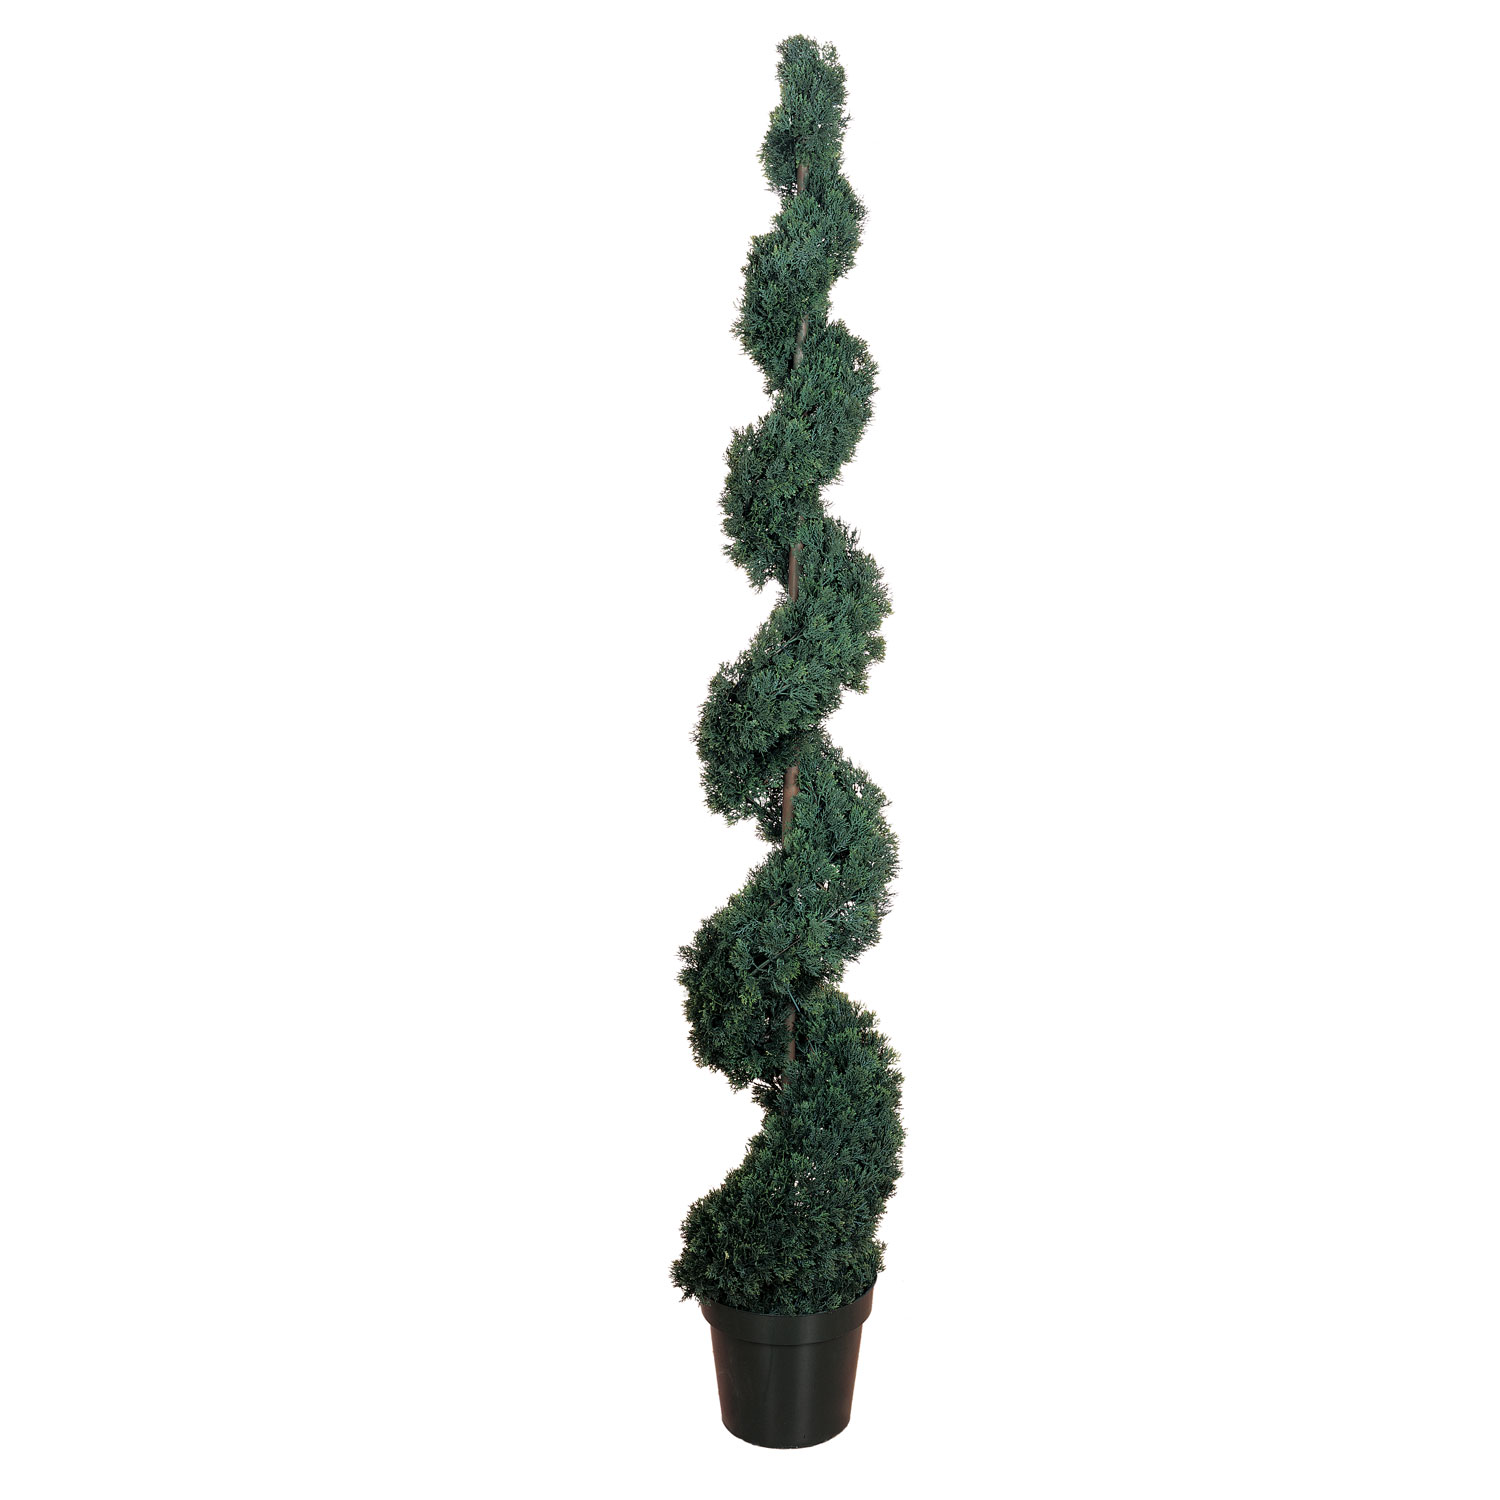 6 Foot Cedar Spiral Topiary: Potted